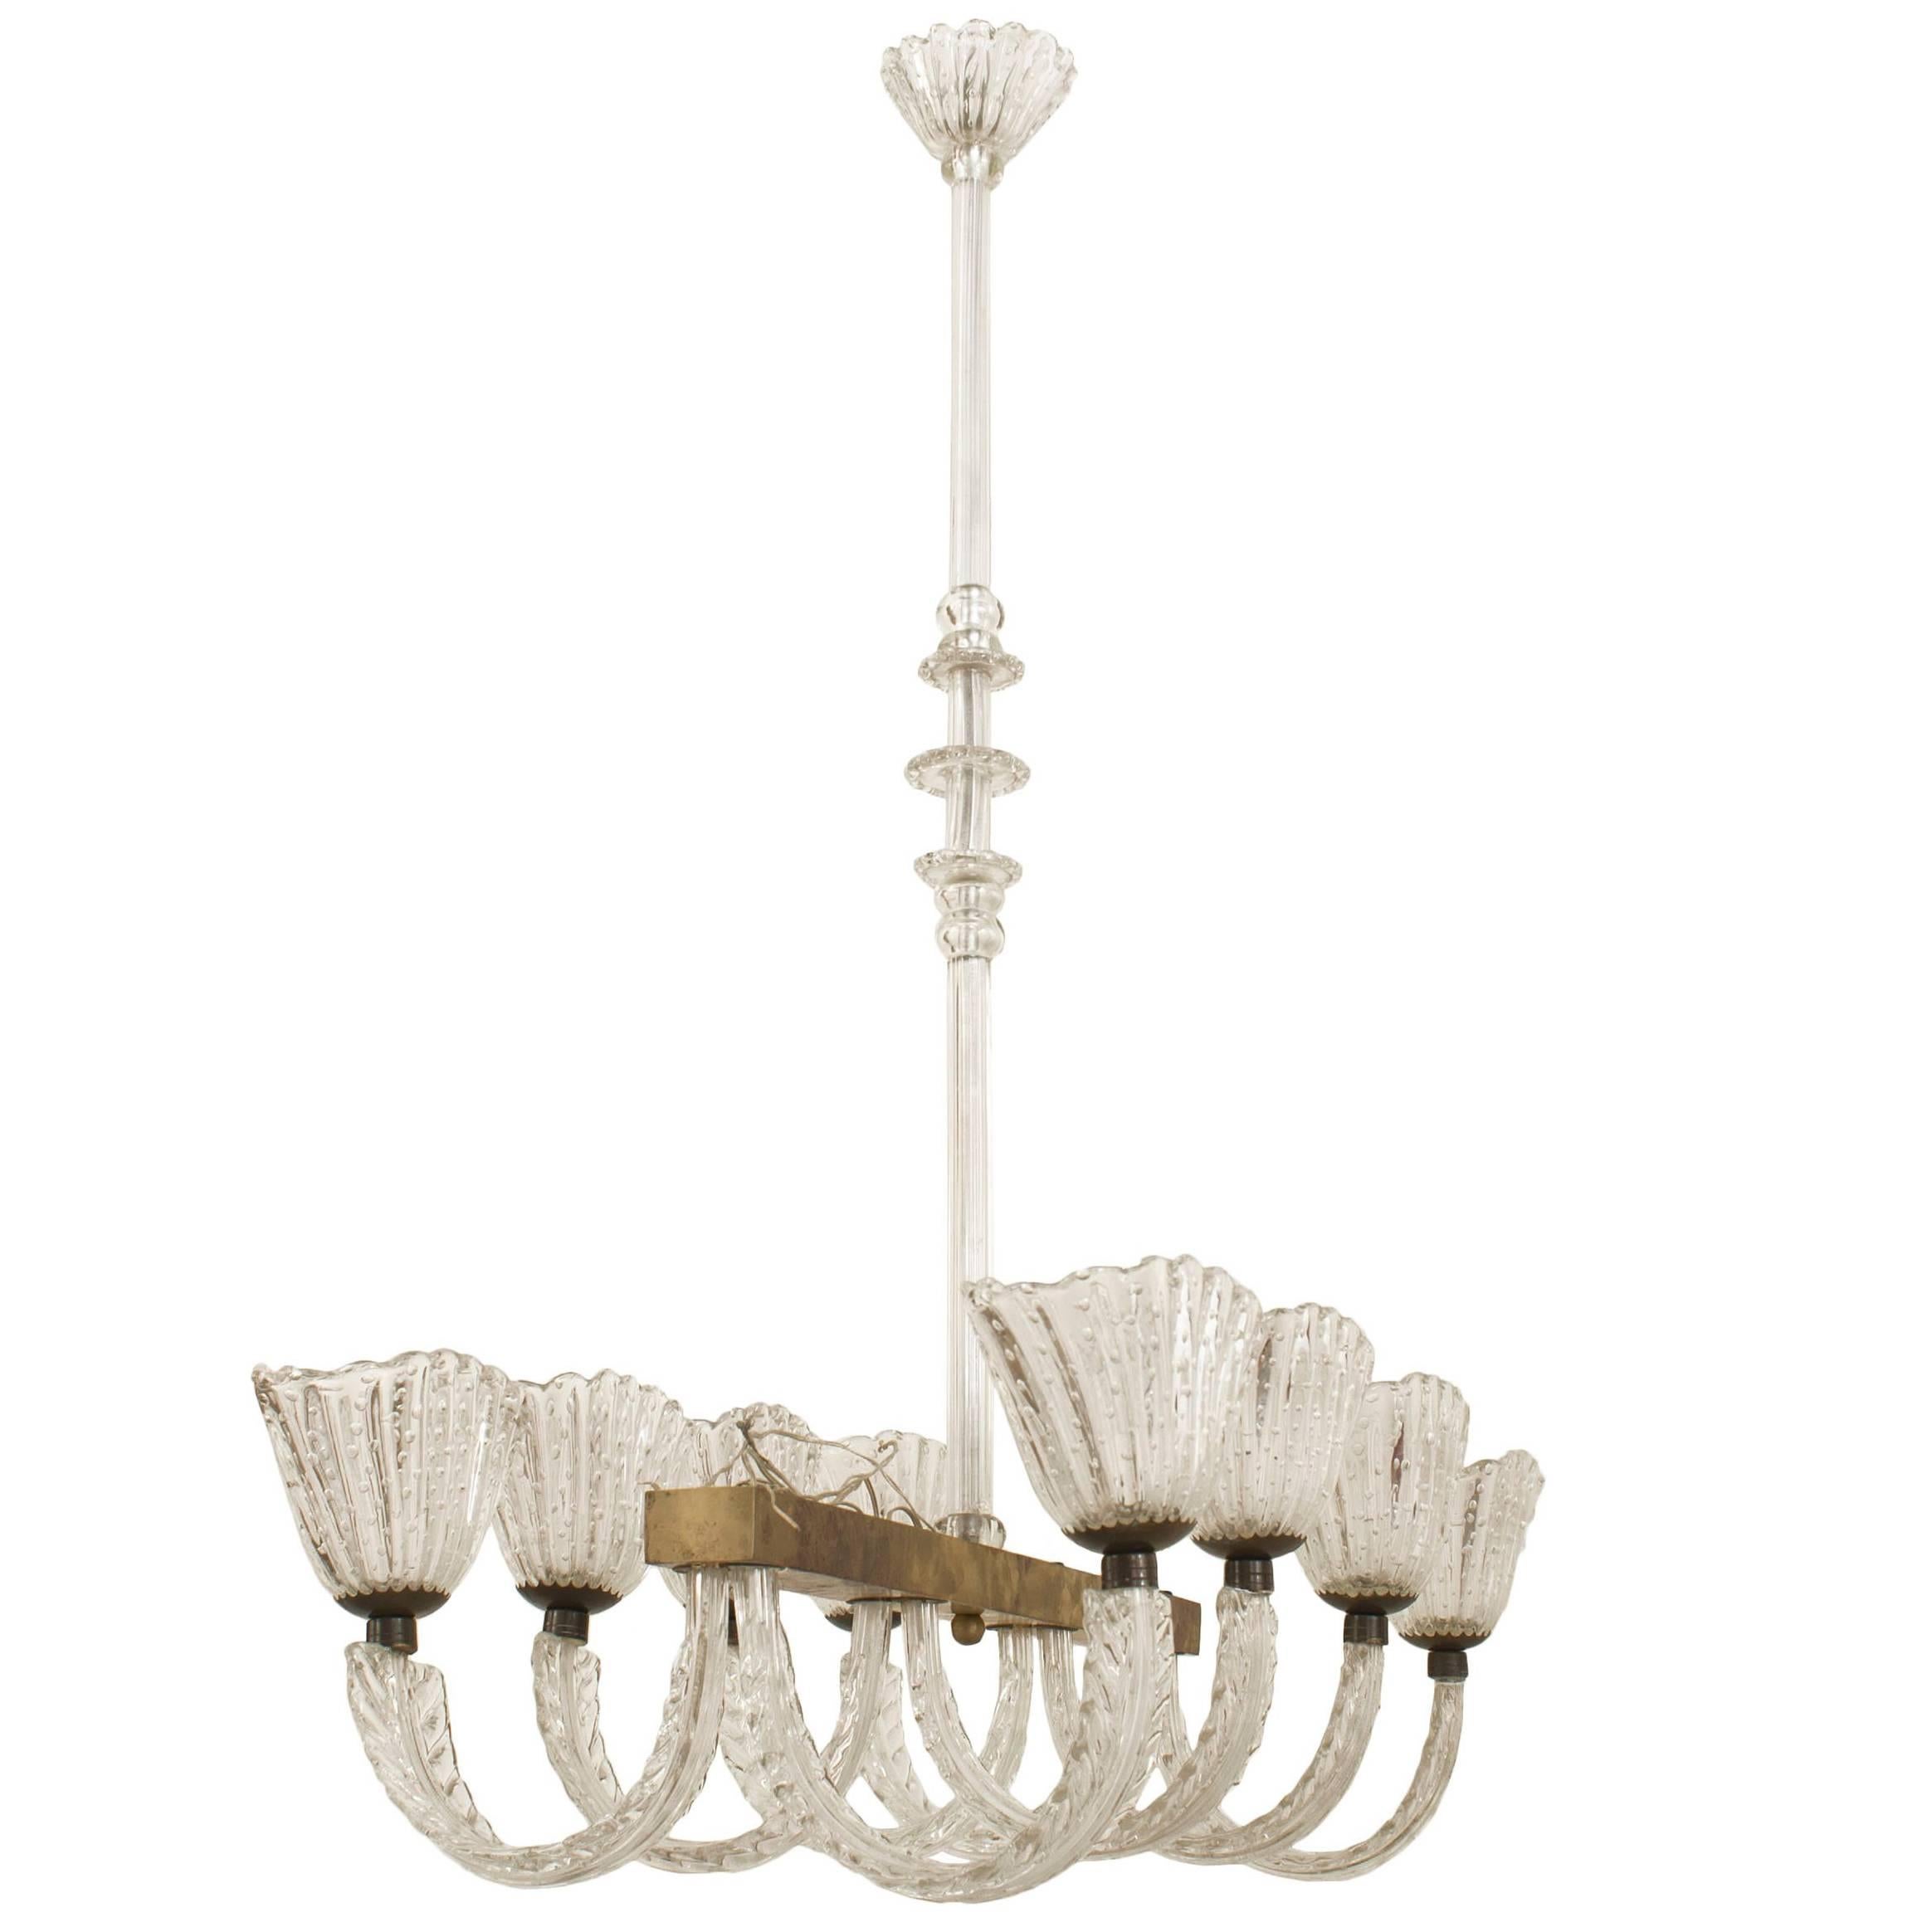 Barovier et Toso Italian Mid-Century Metal and Glass Chandelier